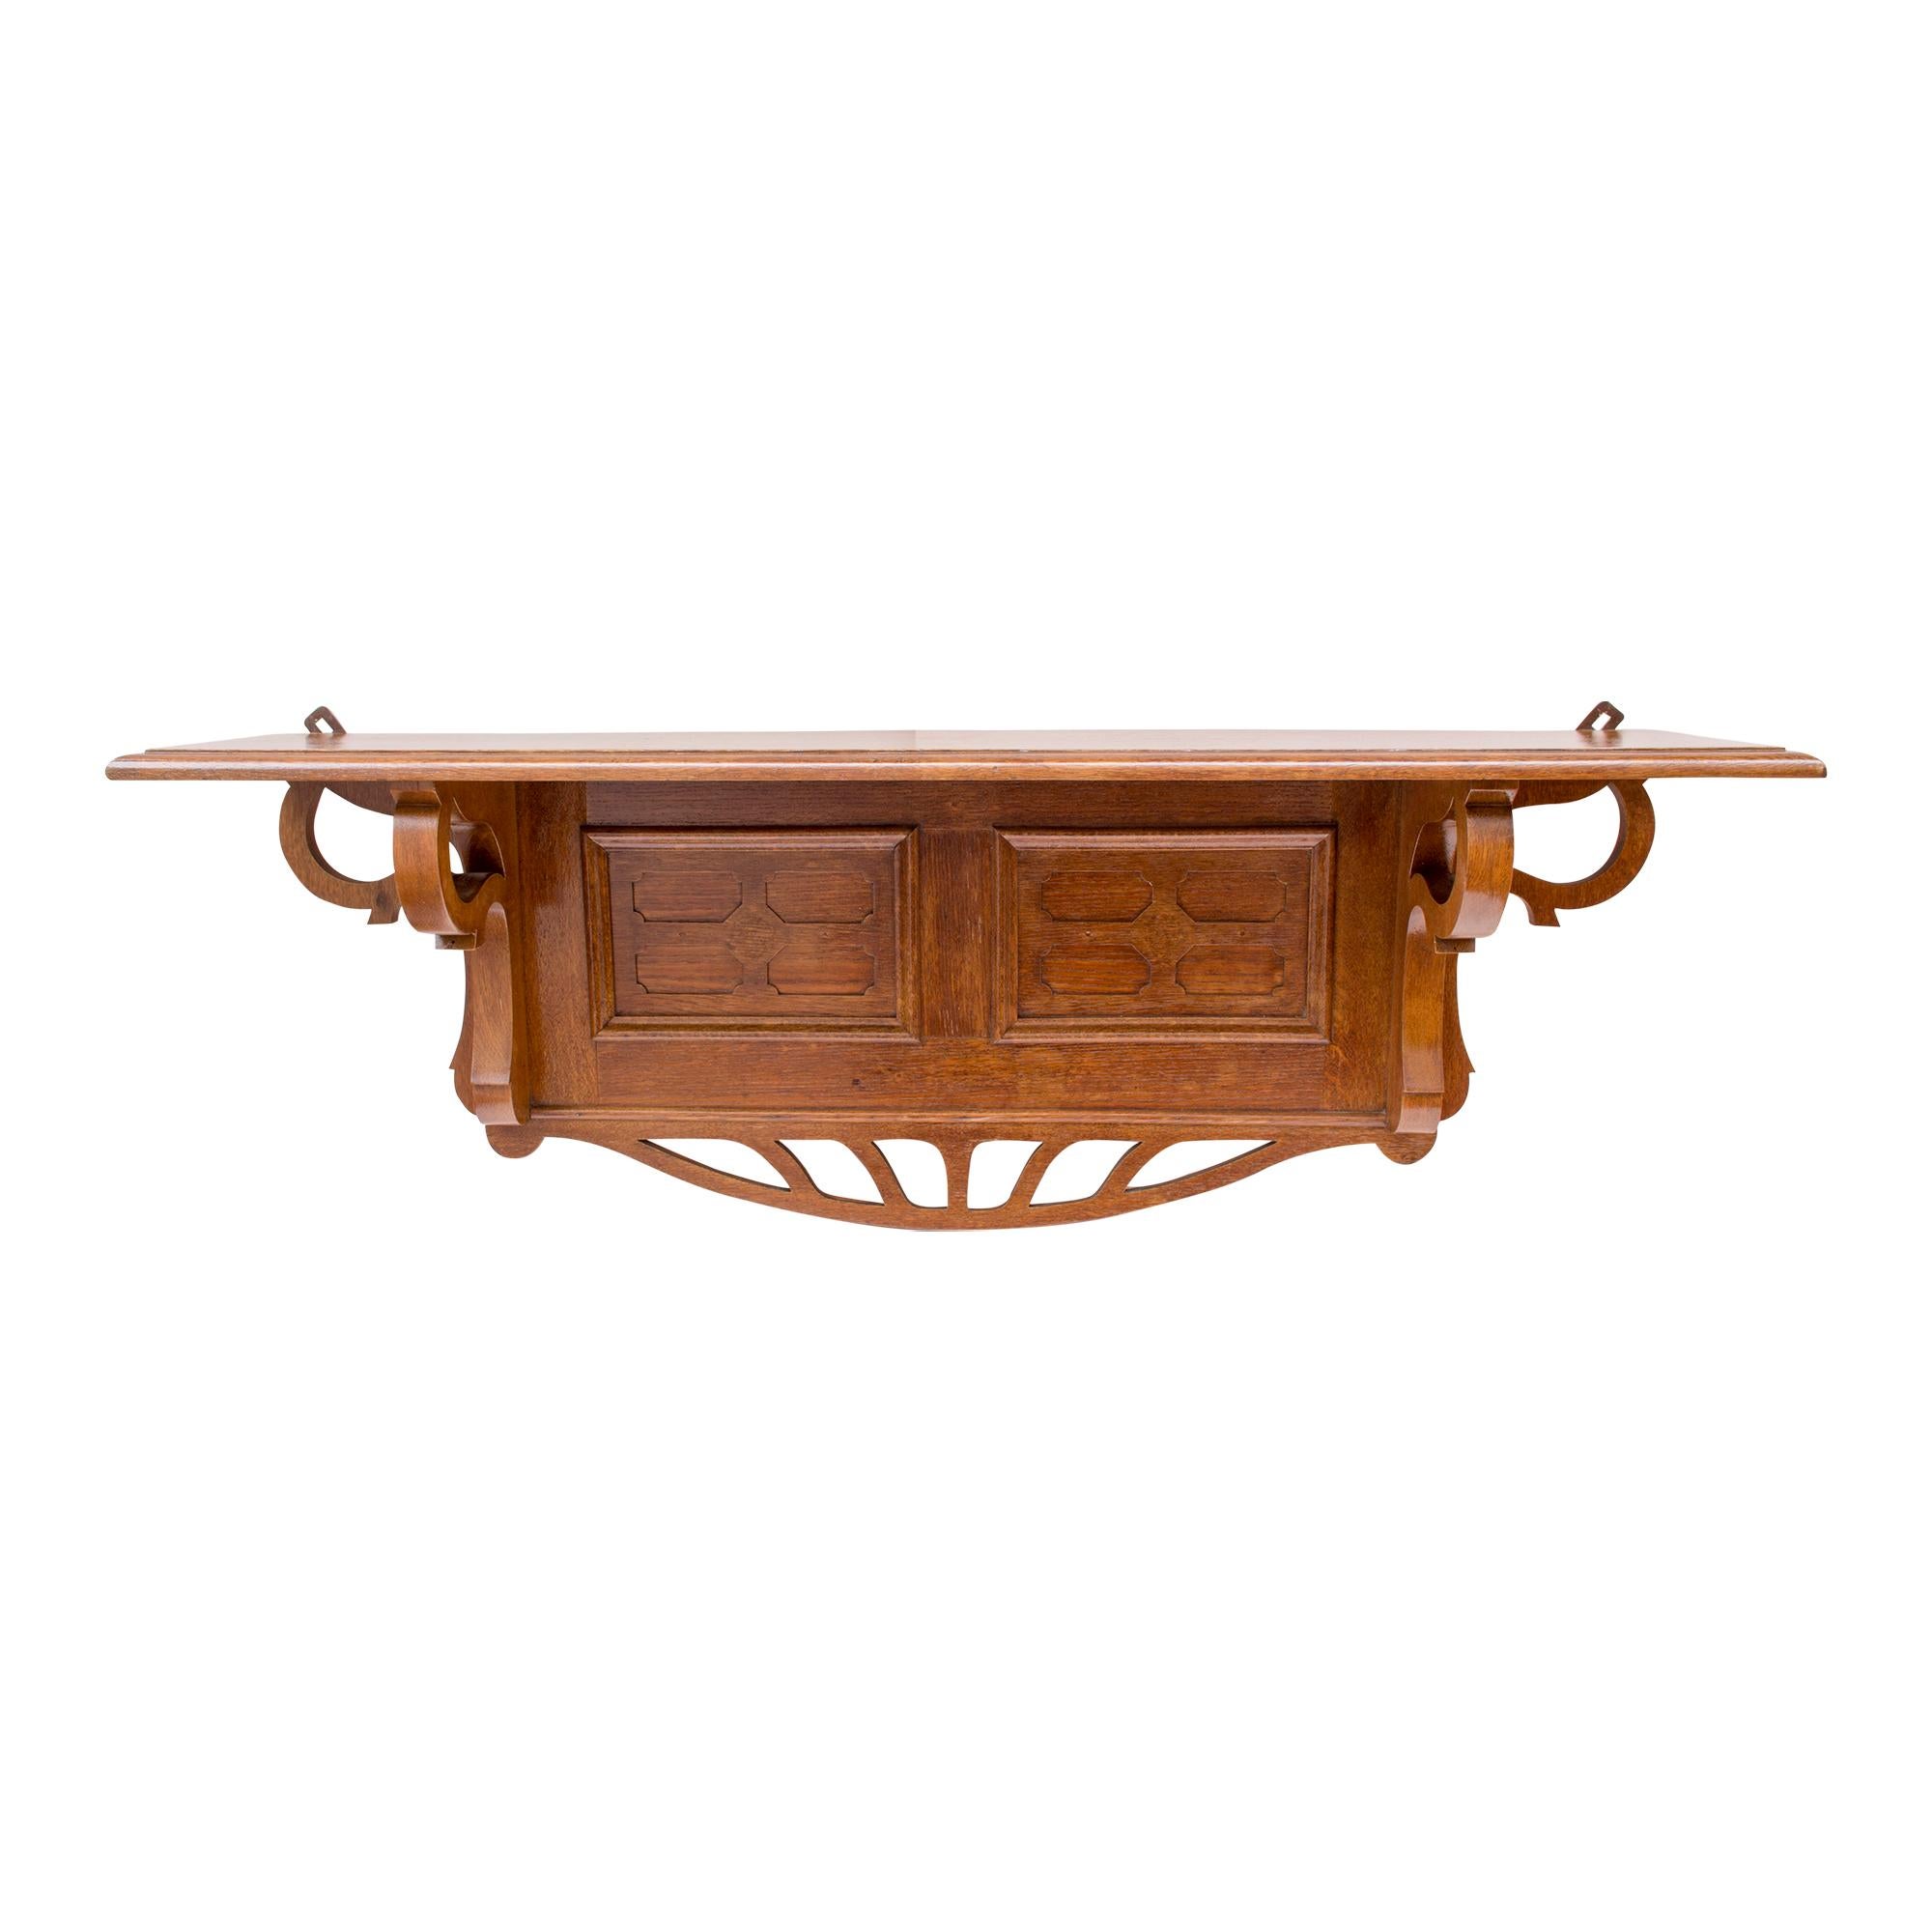 This unique hanging shelf is from the Art Nouveau period from Germany around 1895. The shelf is hung on the wall with two original eyelets. The shelf was made of oak and is hand polished in good condition. 
A very beautiful classic German Art